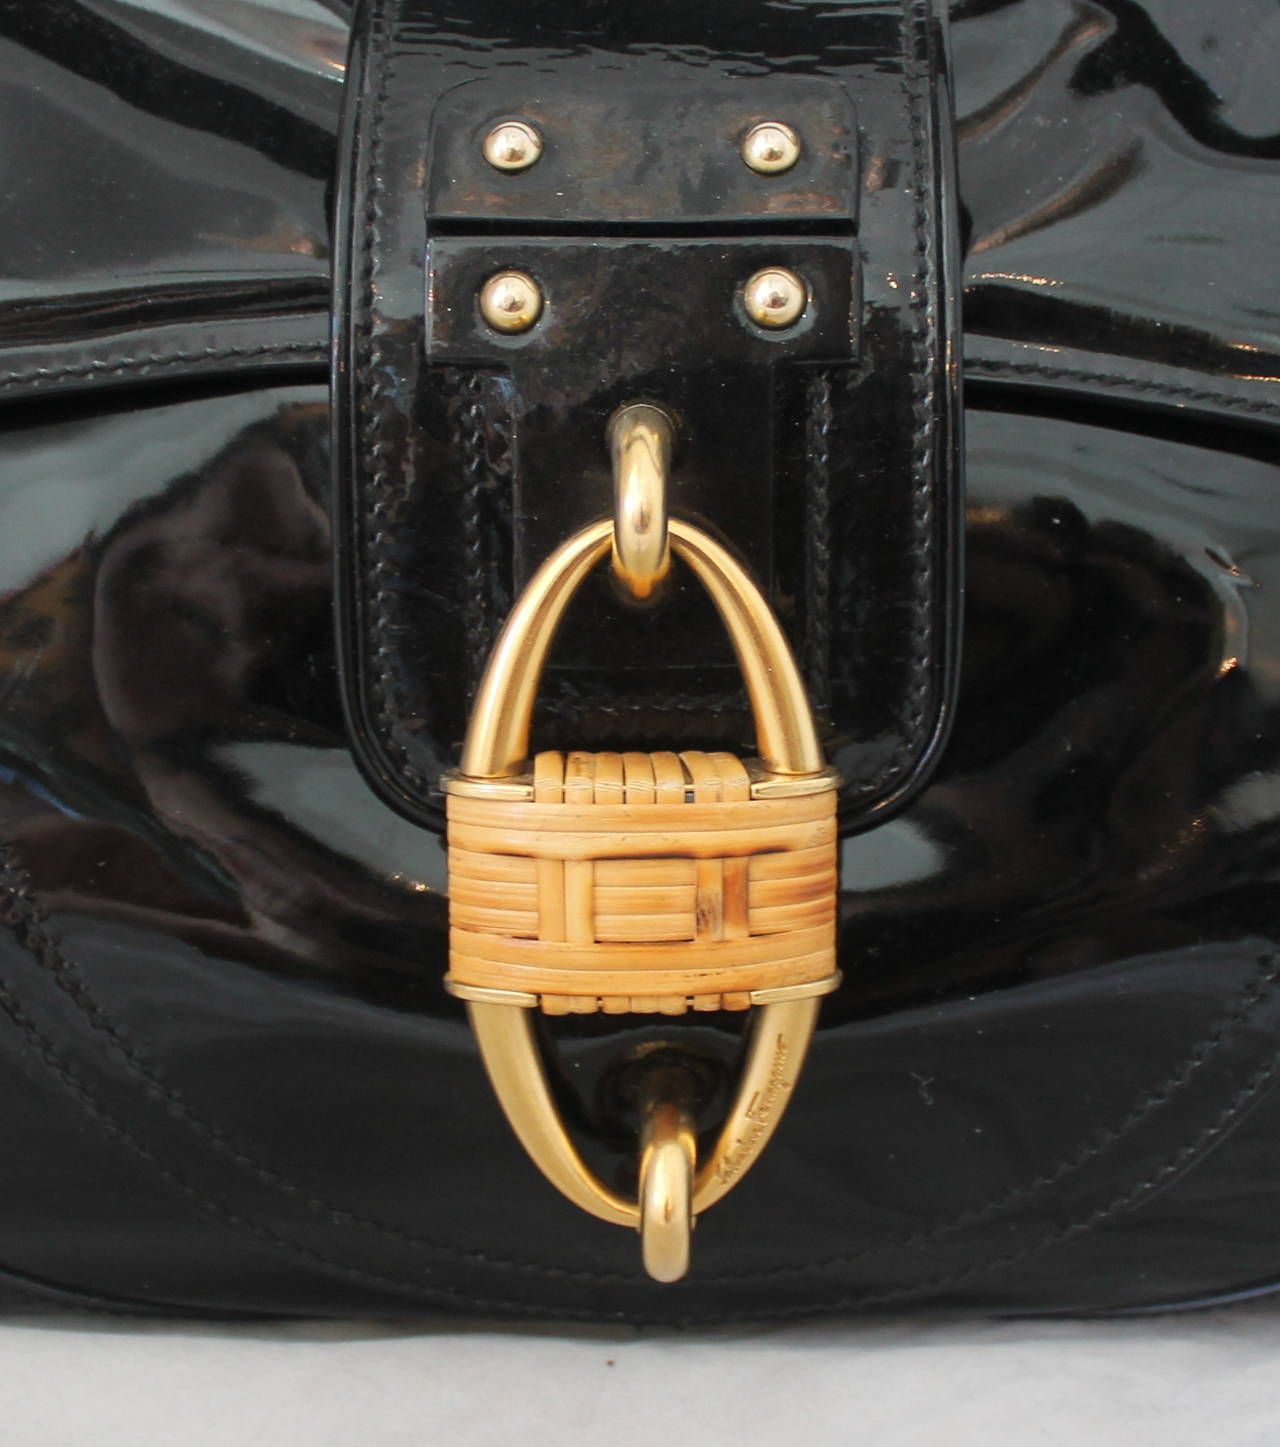 Salvatore Ferragamo Black Patent Leather Shoulder Bag with Gold Hardware and Bamboo Motif Clasp. This Bag is in Excellent Condition.

Measurements:
Height: 8 